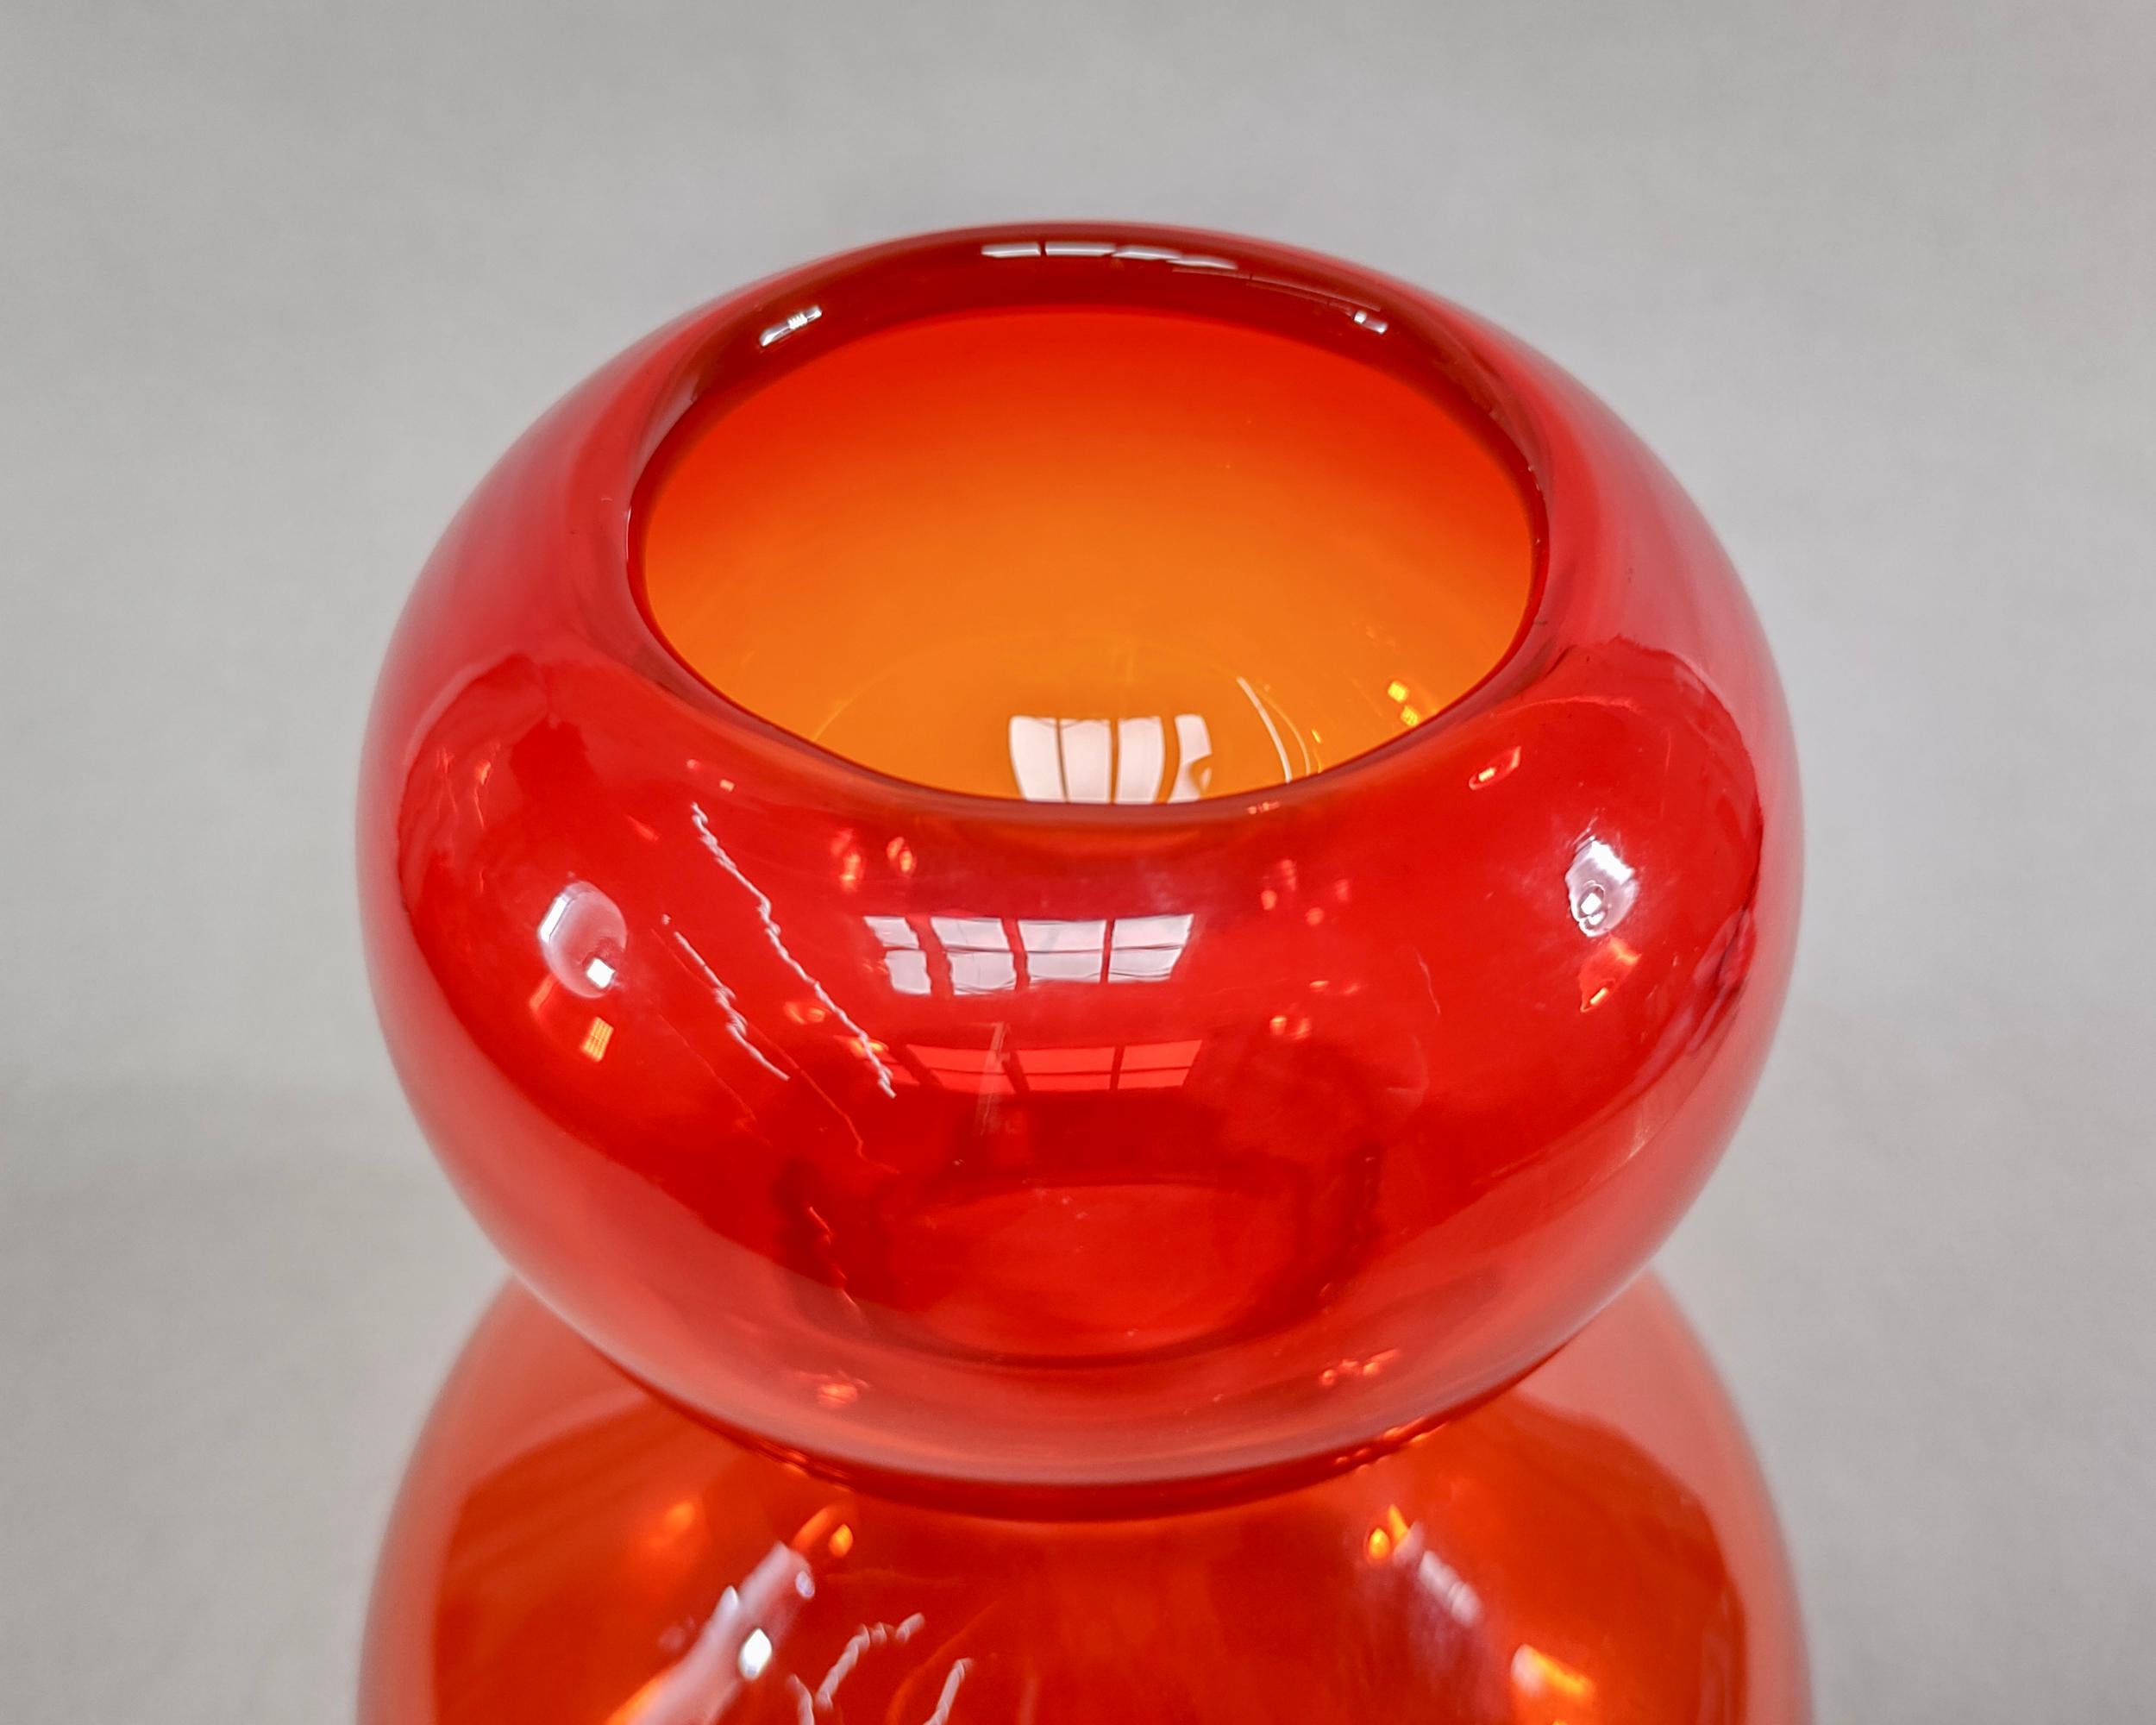 Greenwich Flint-Craft bright orange #1172 glass bubble vase designed by Tom Connally. Overall excellent vintage condition, original sticker intact.

8.75